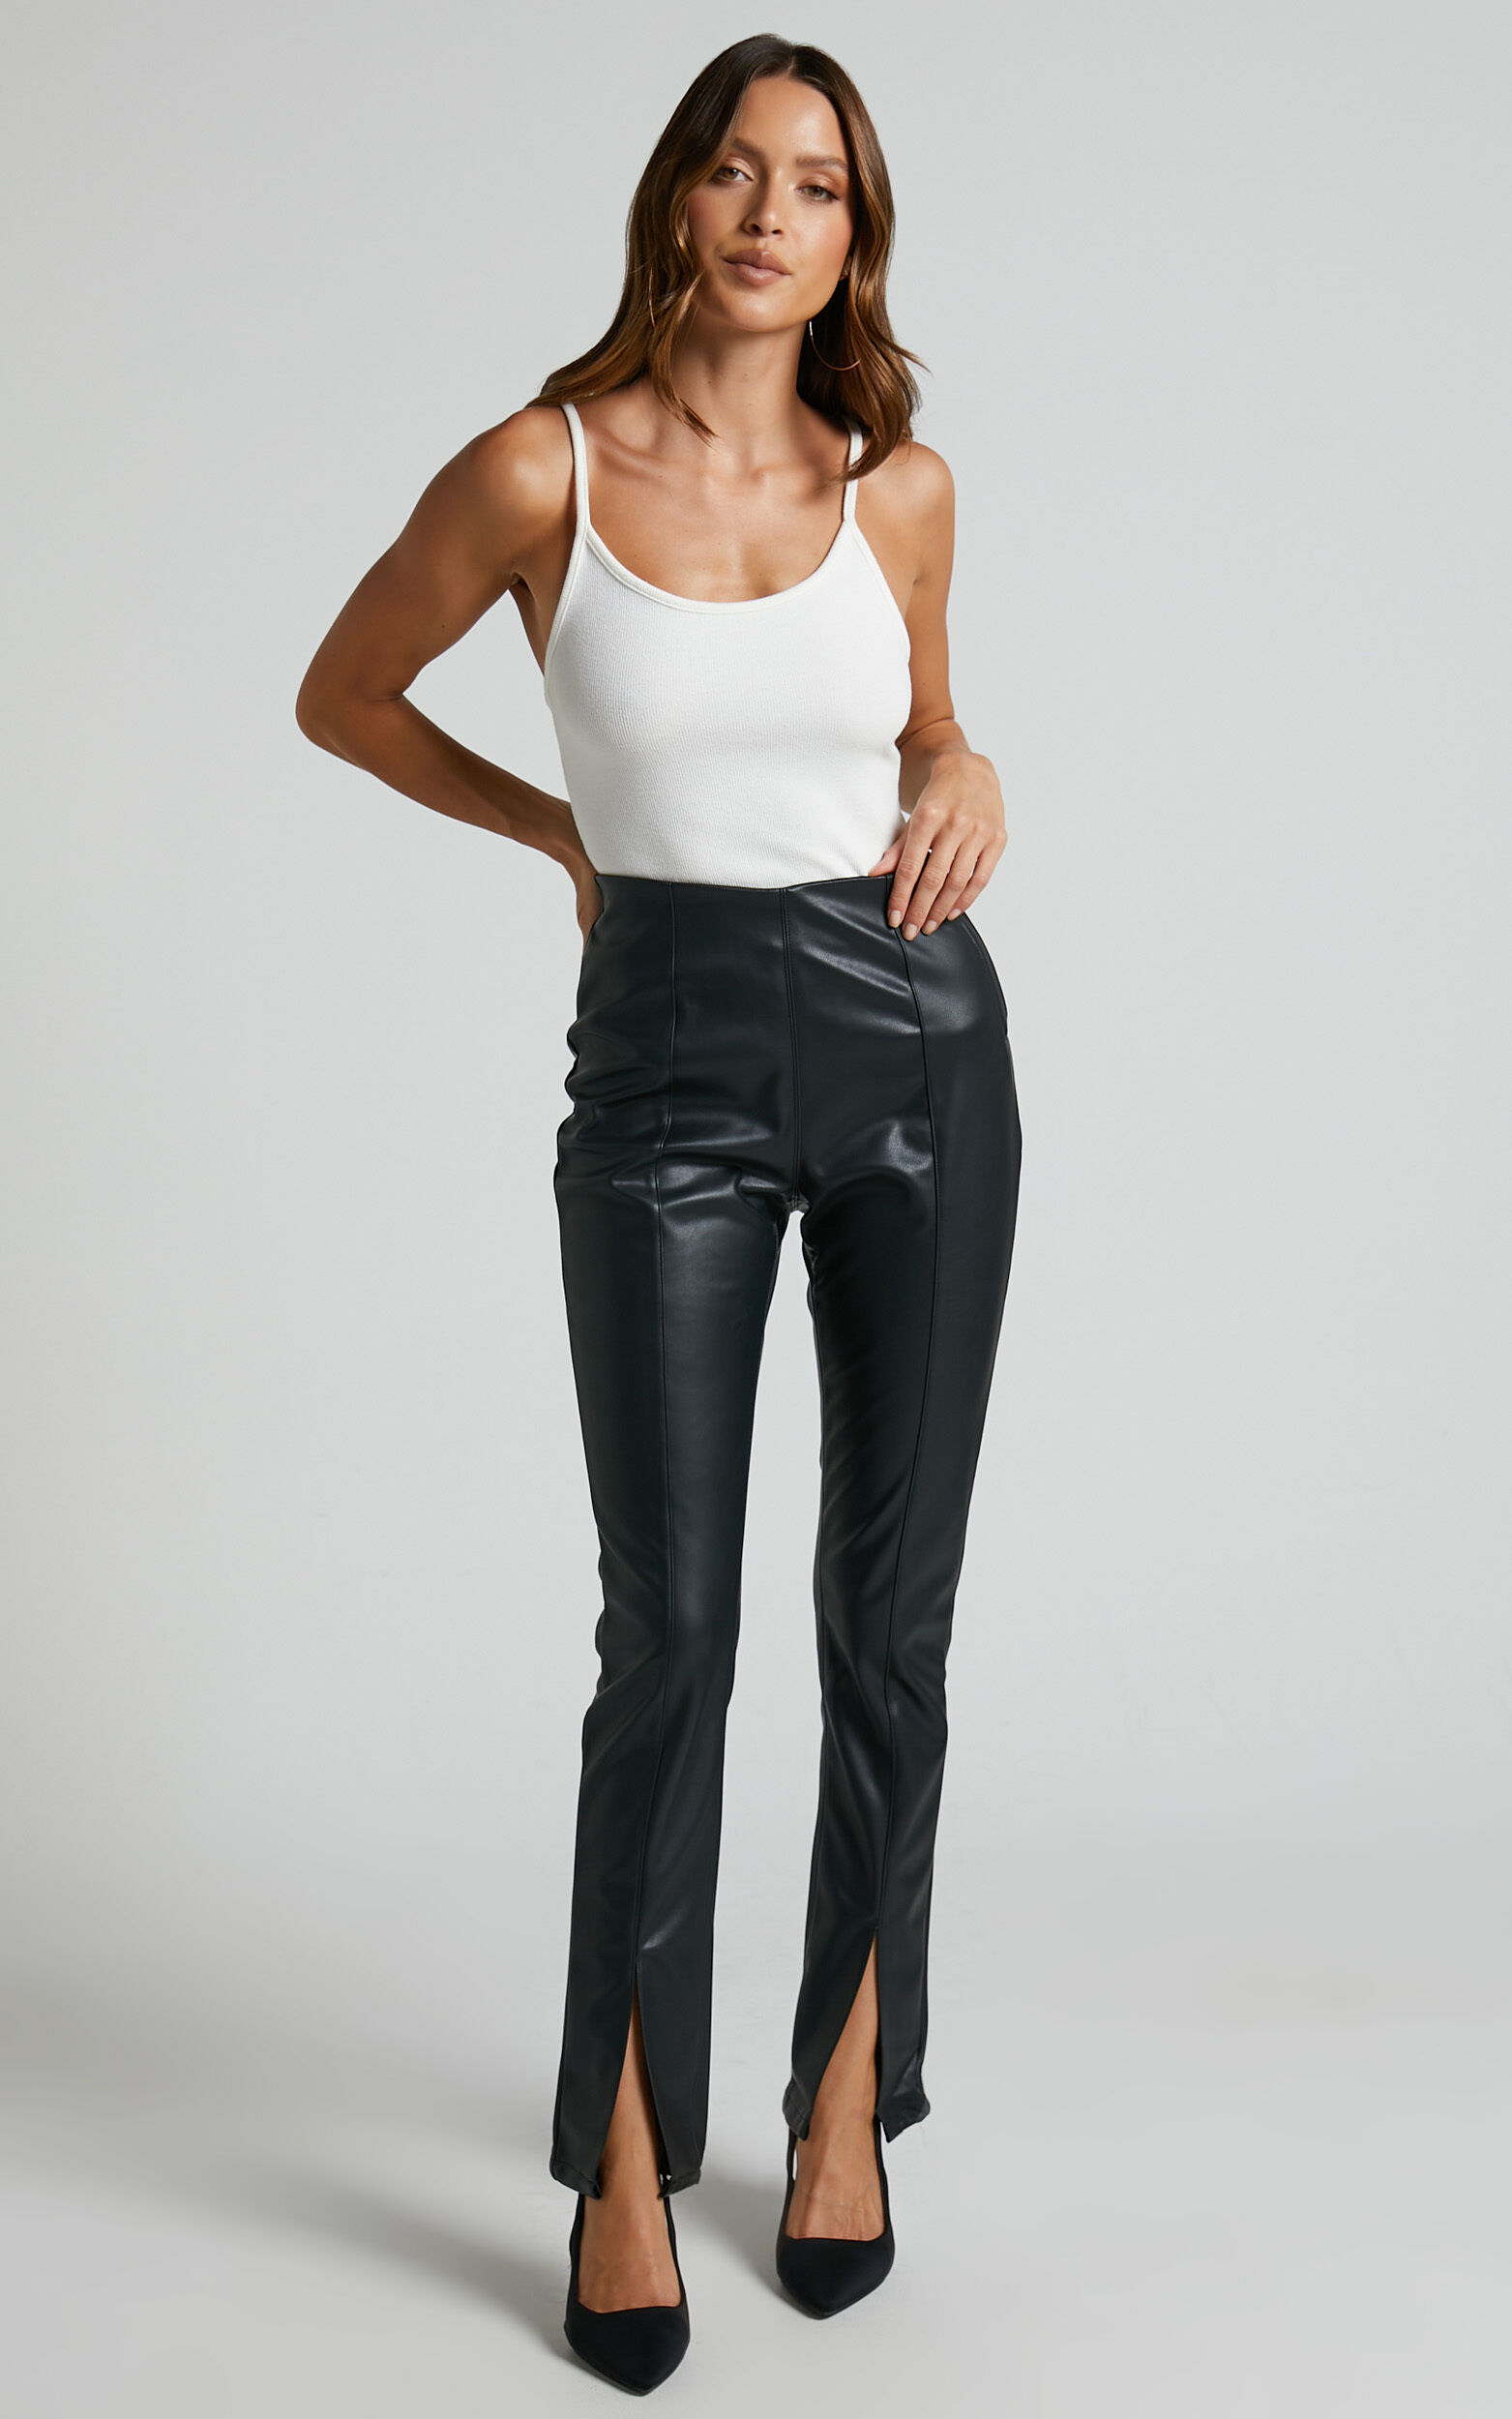 High-Waisted Faux-Leather Leggings for Women